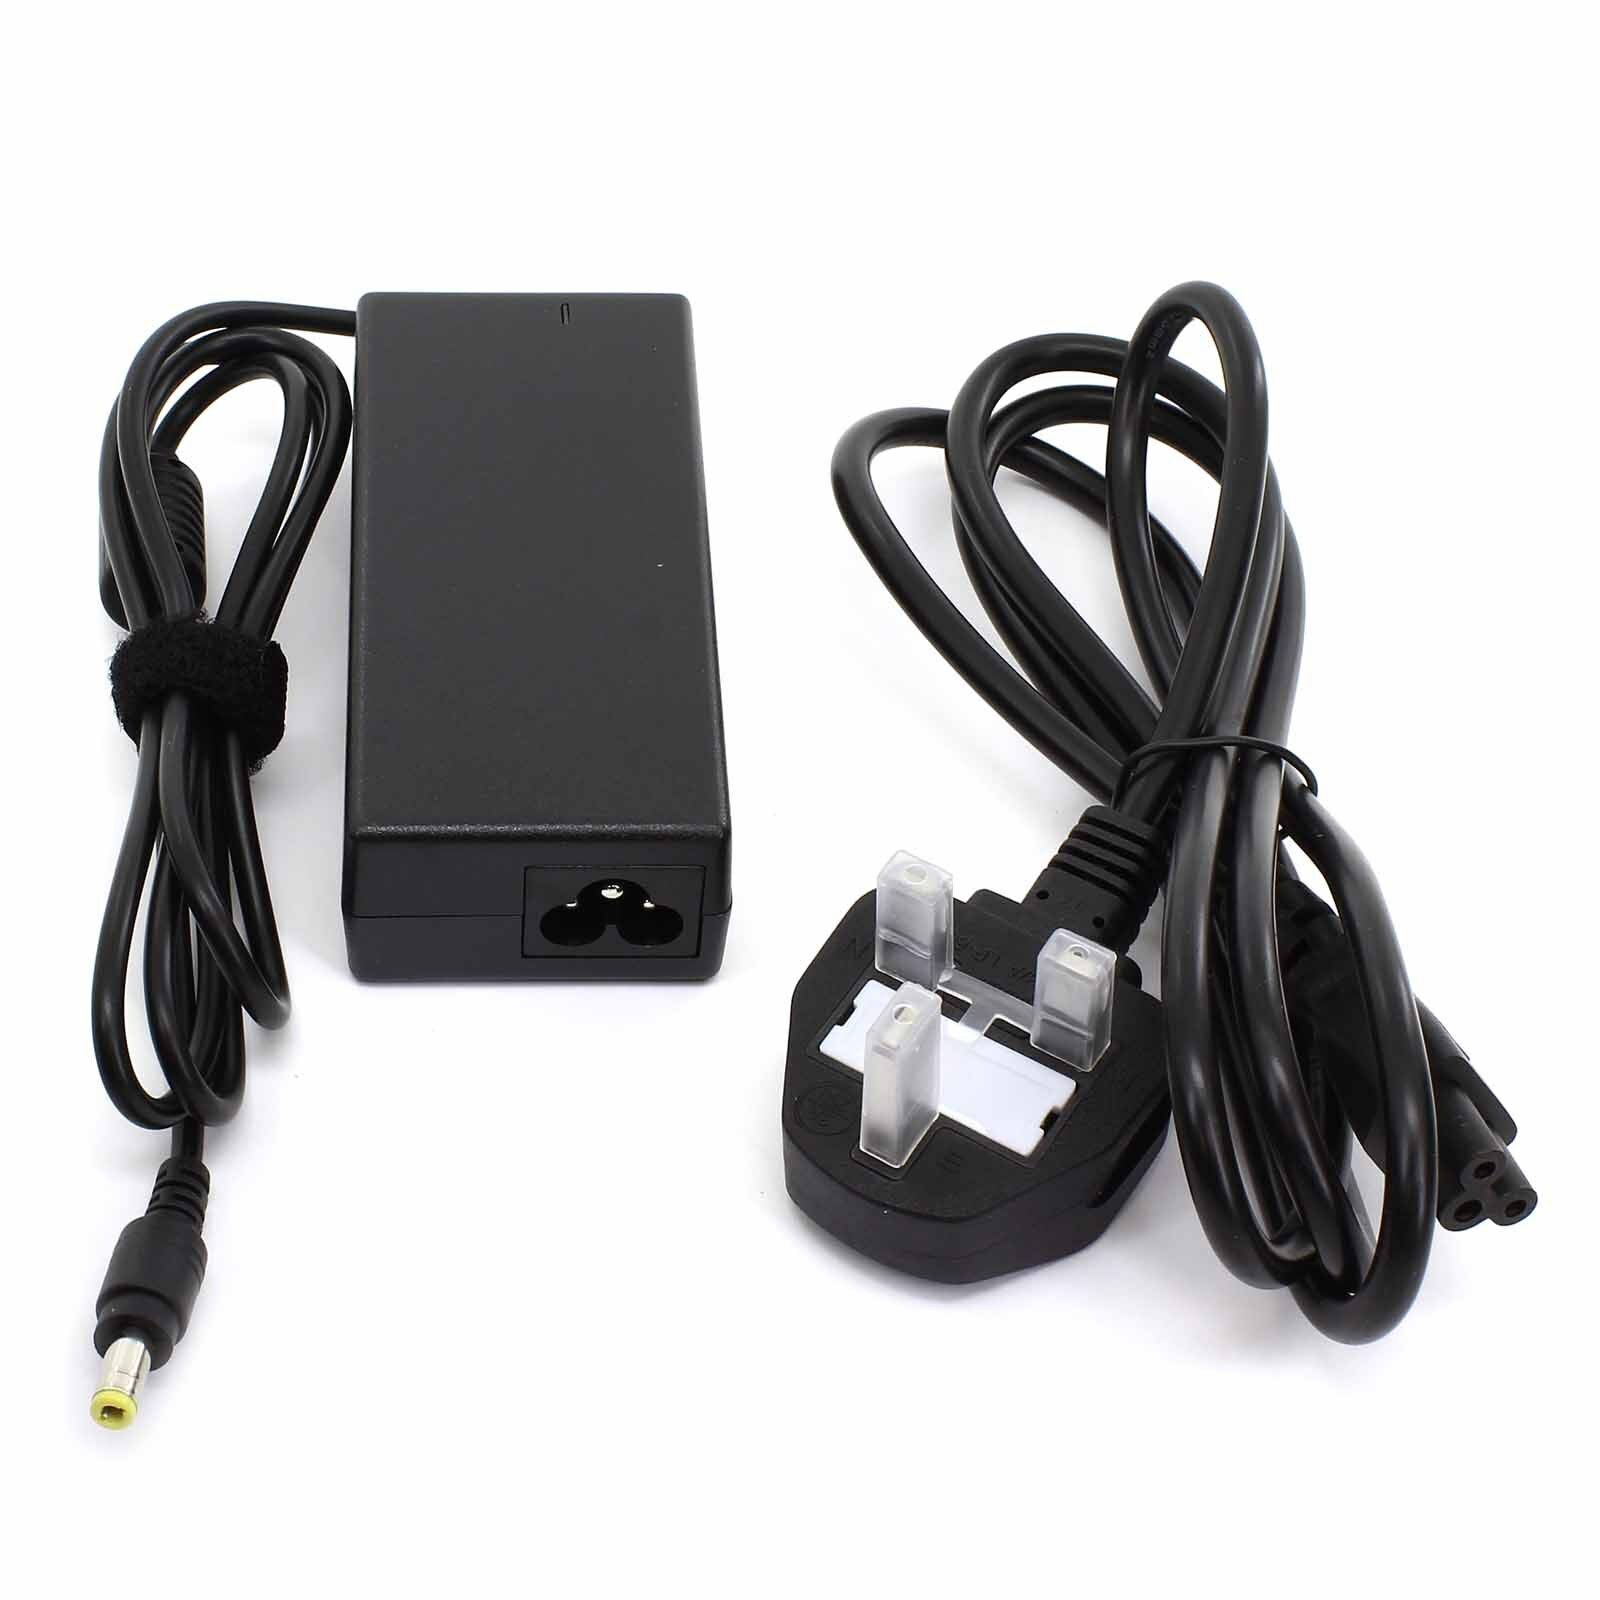 6.0V 1.0A AC Power Adapter for Bush All Weather Rechargeable DAB Radio NE-2151 To - Click Image to Close